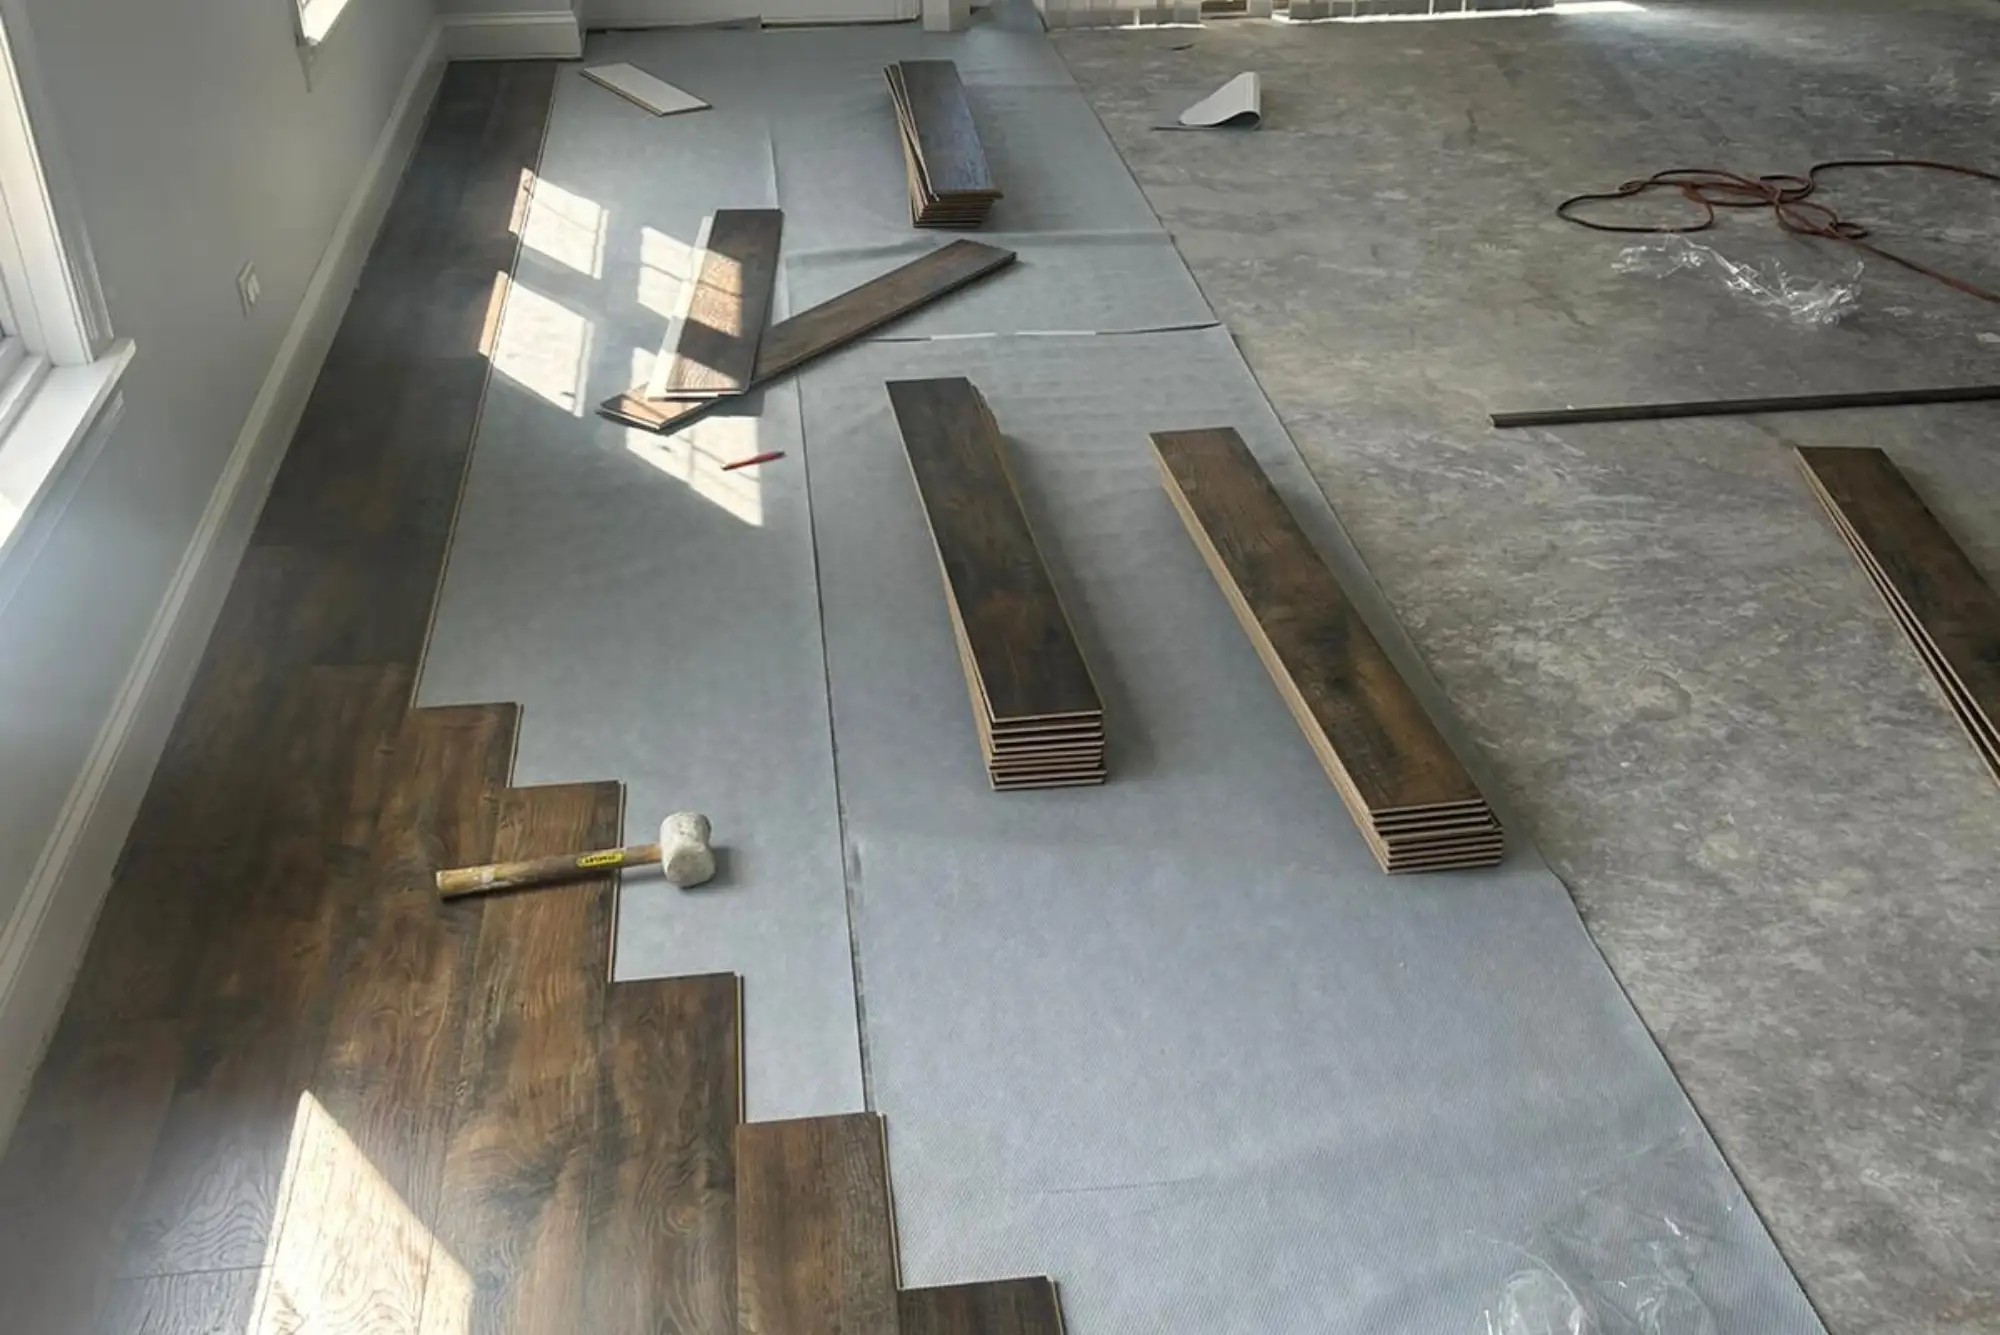 Skilled professionals installing laminate flooring, ensuring a seamless and durable finish.